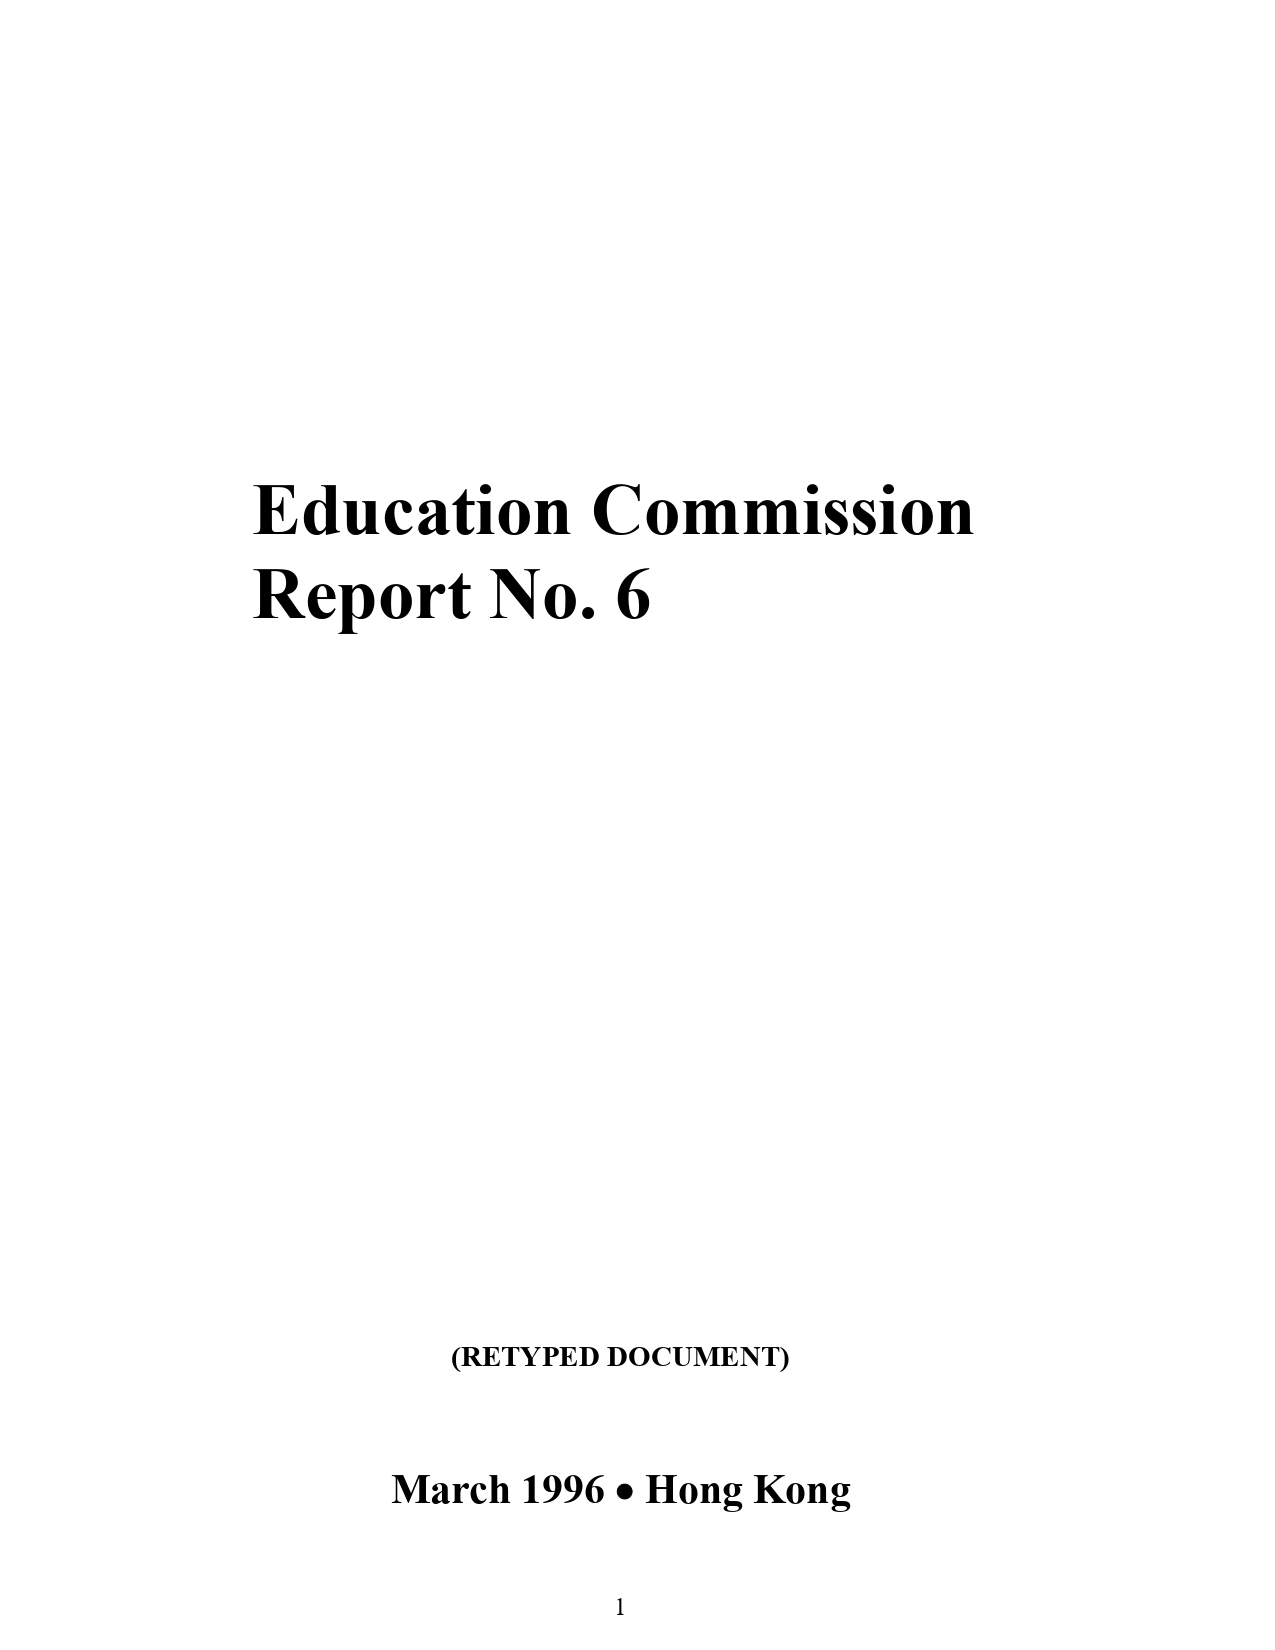 Education Commission Report No. 6